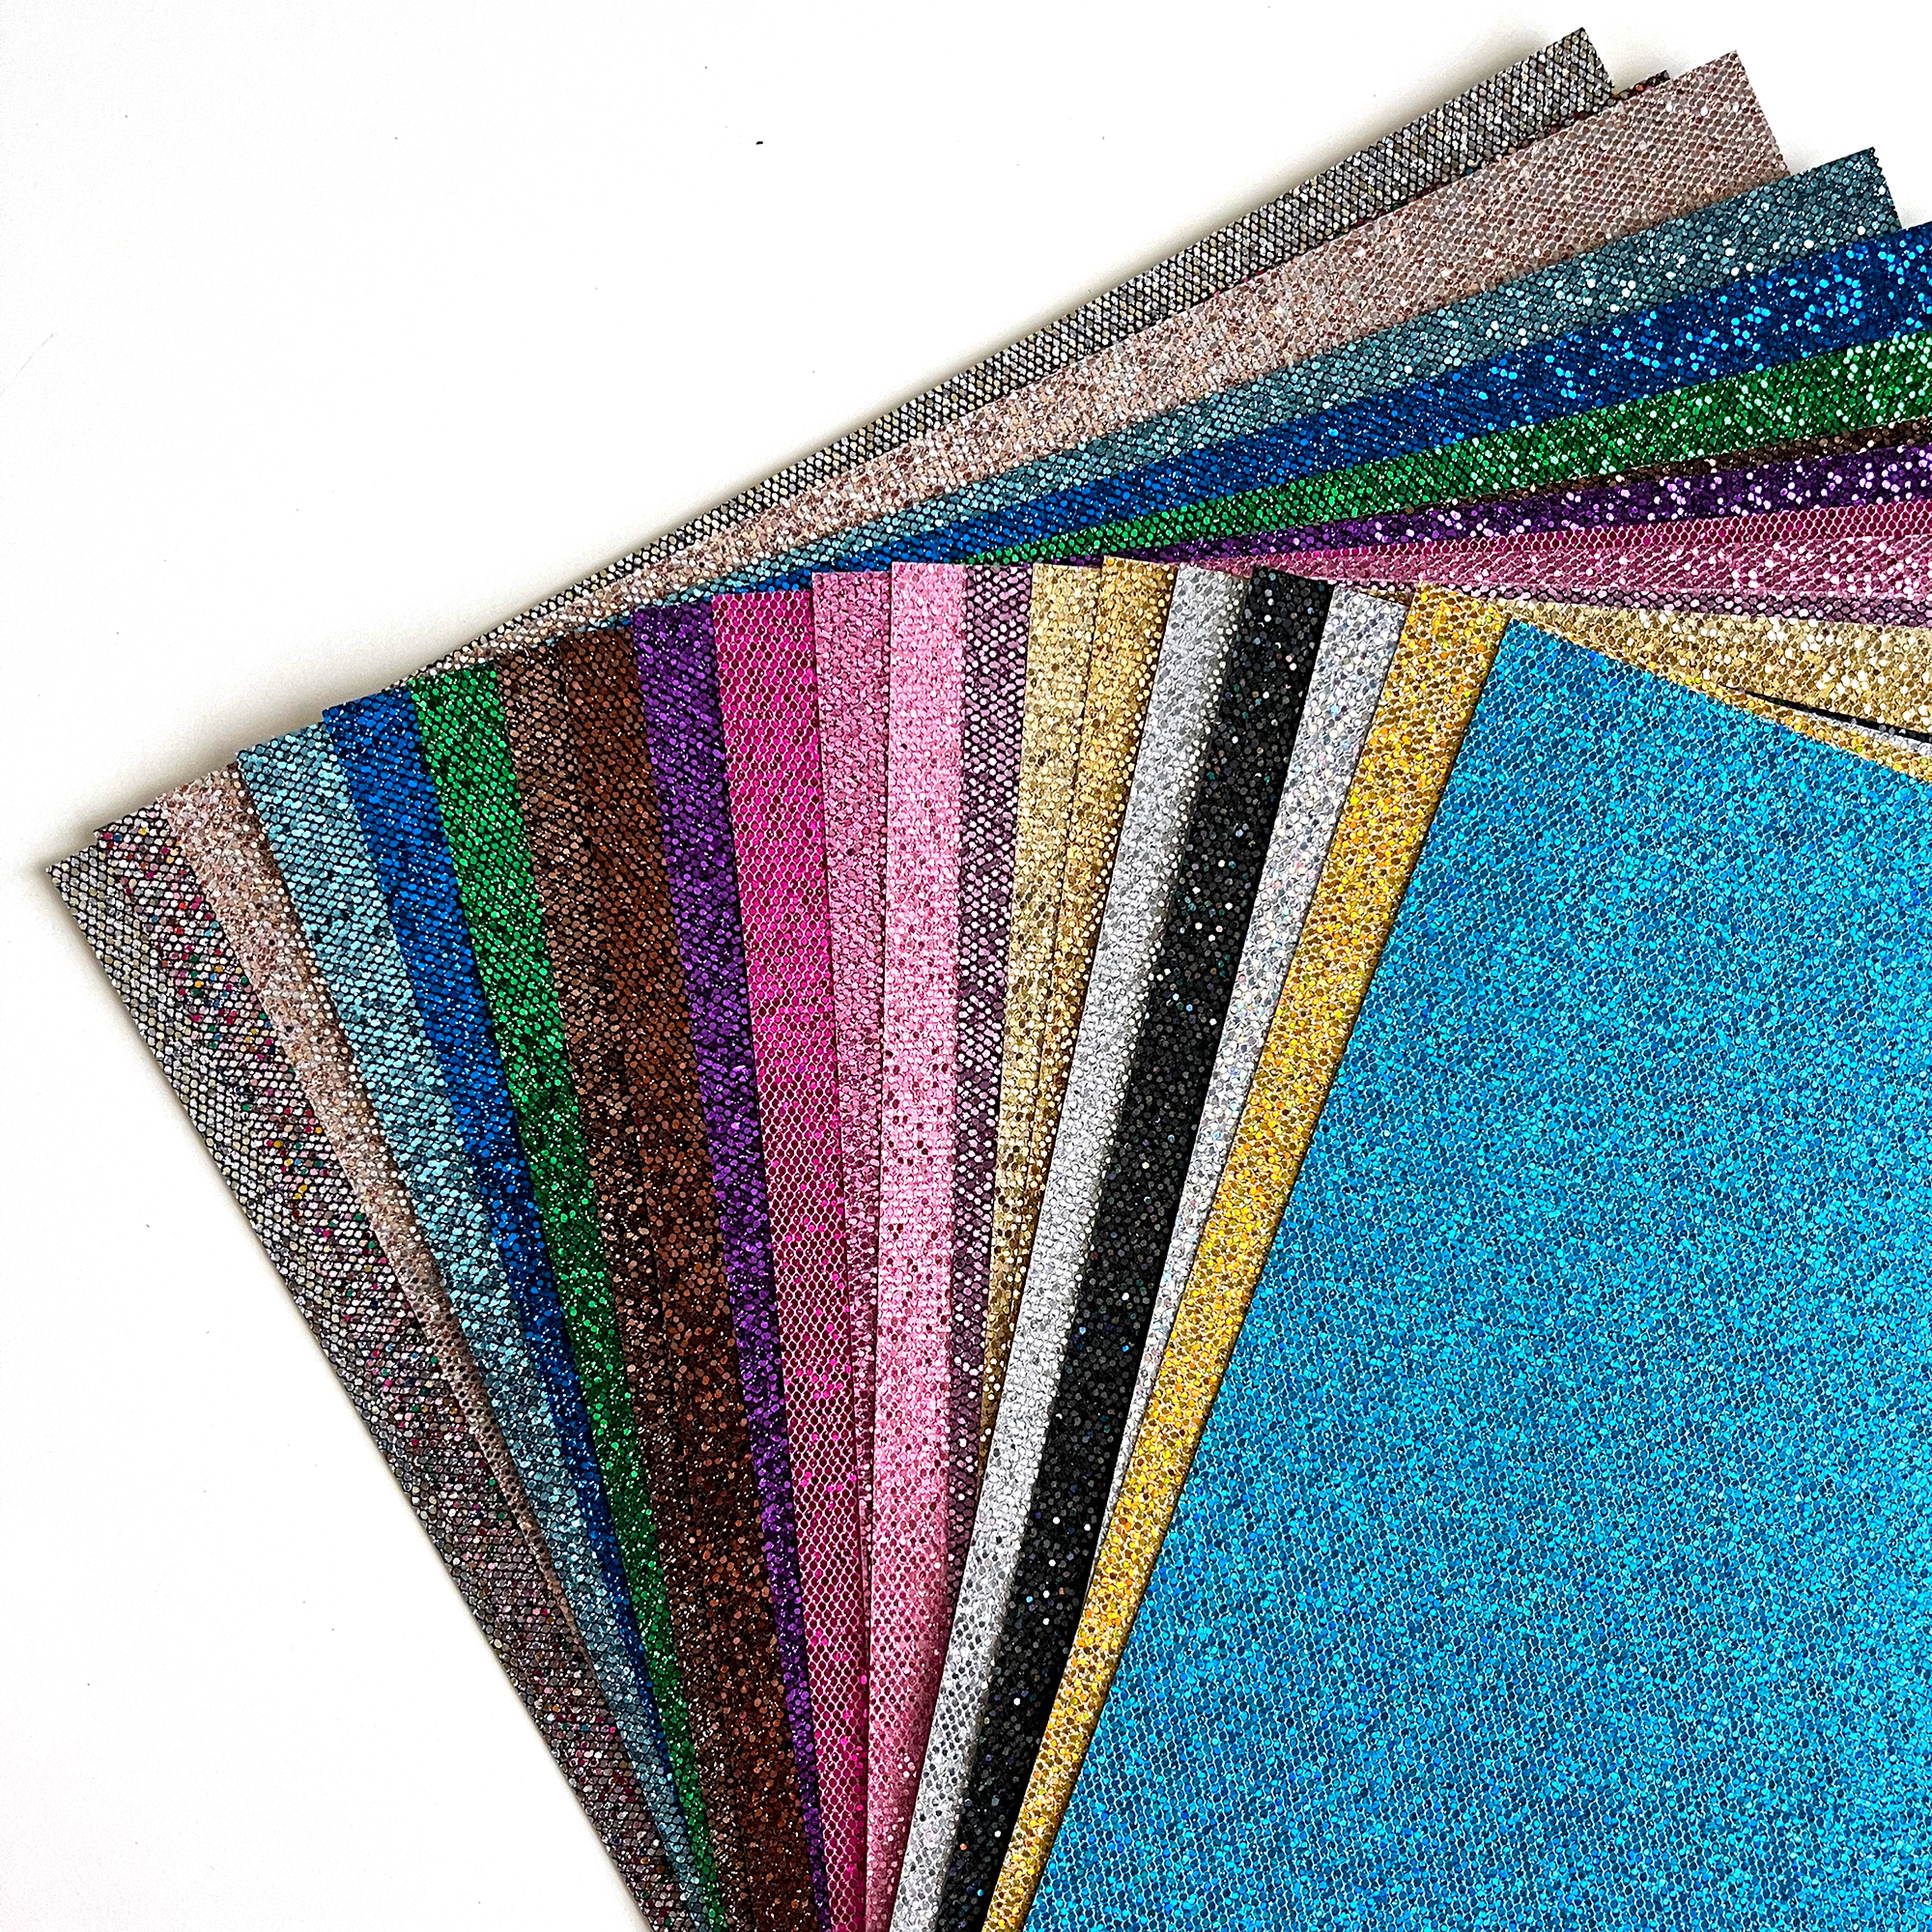 Sparkle Glitter Persian Blue 12x12 Cardstock Paper - 2 Sheets – Country  Croppers